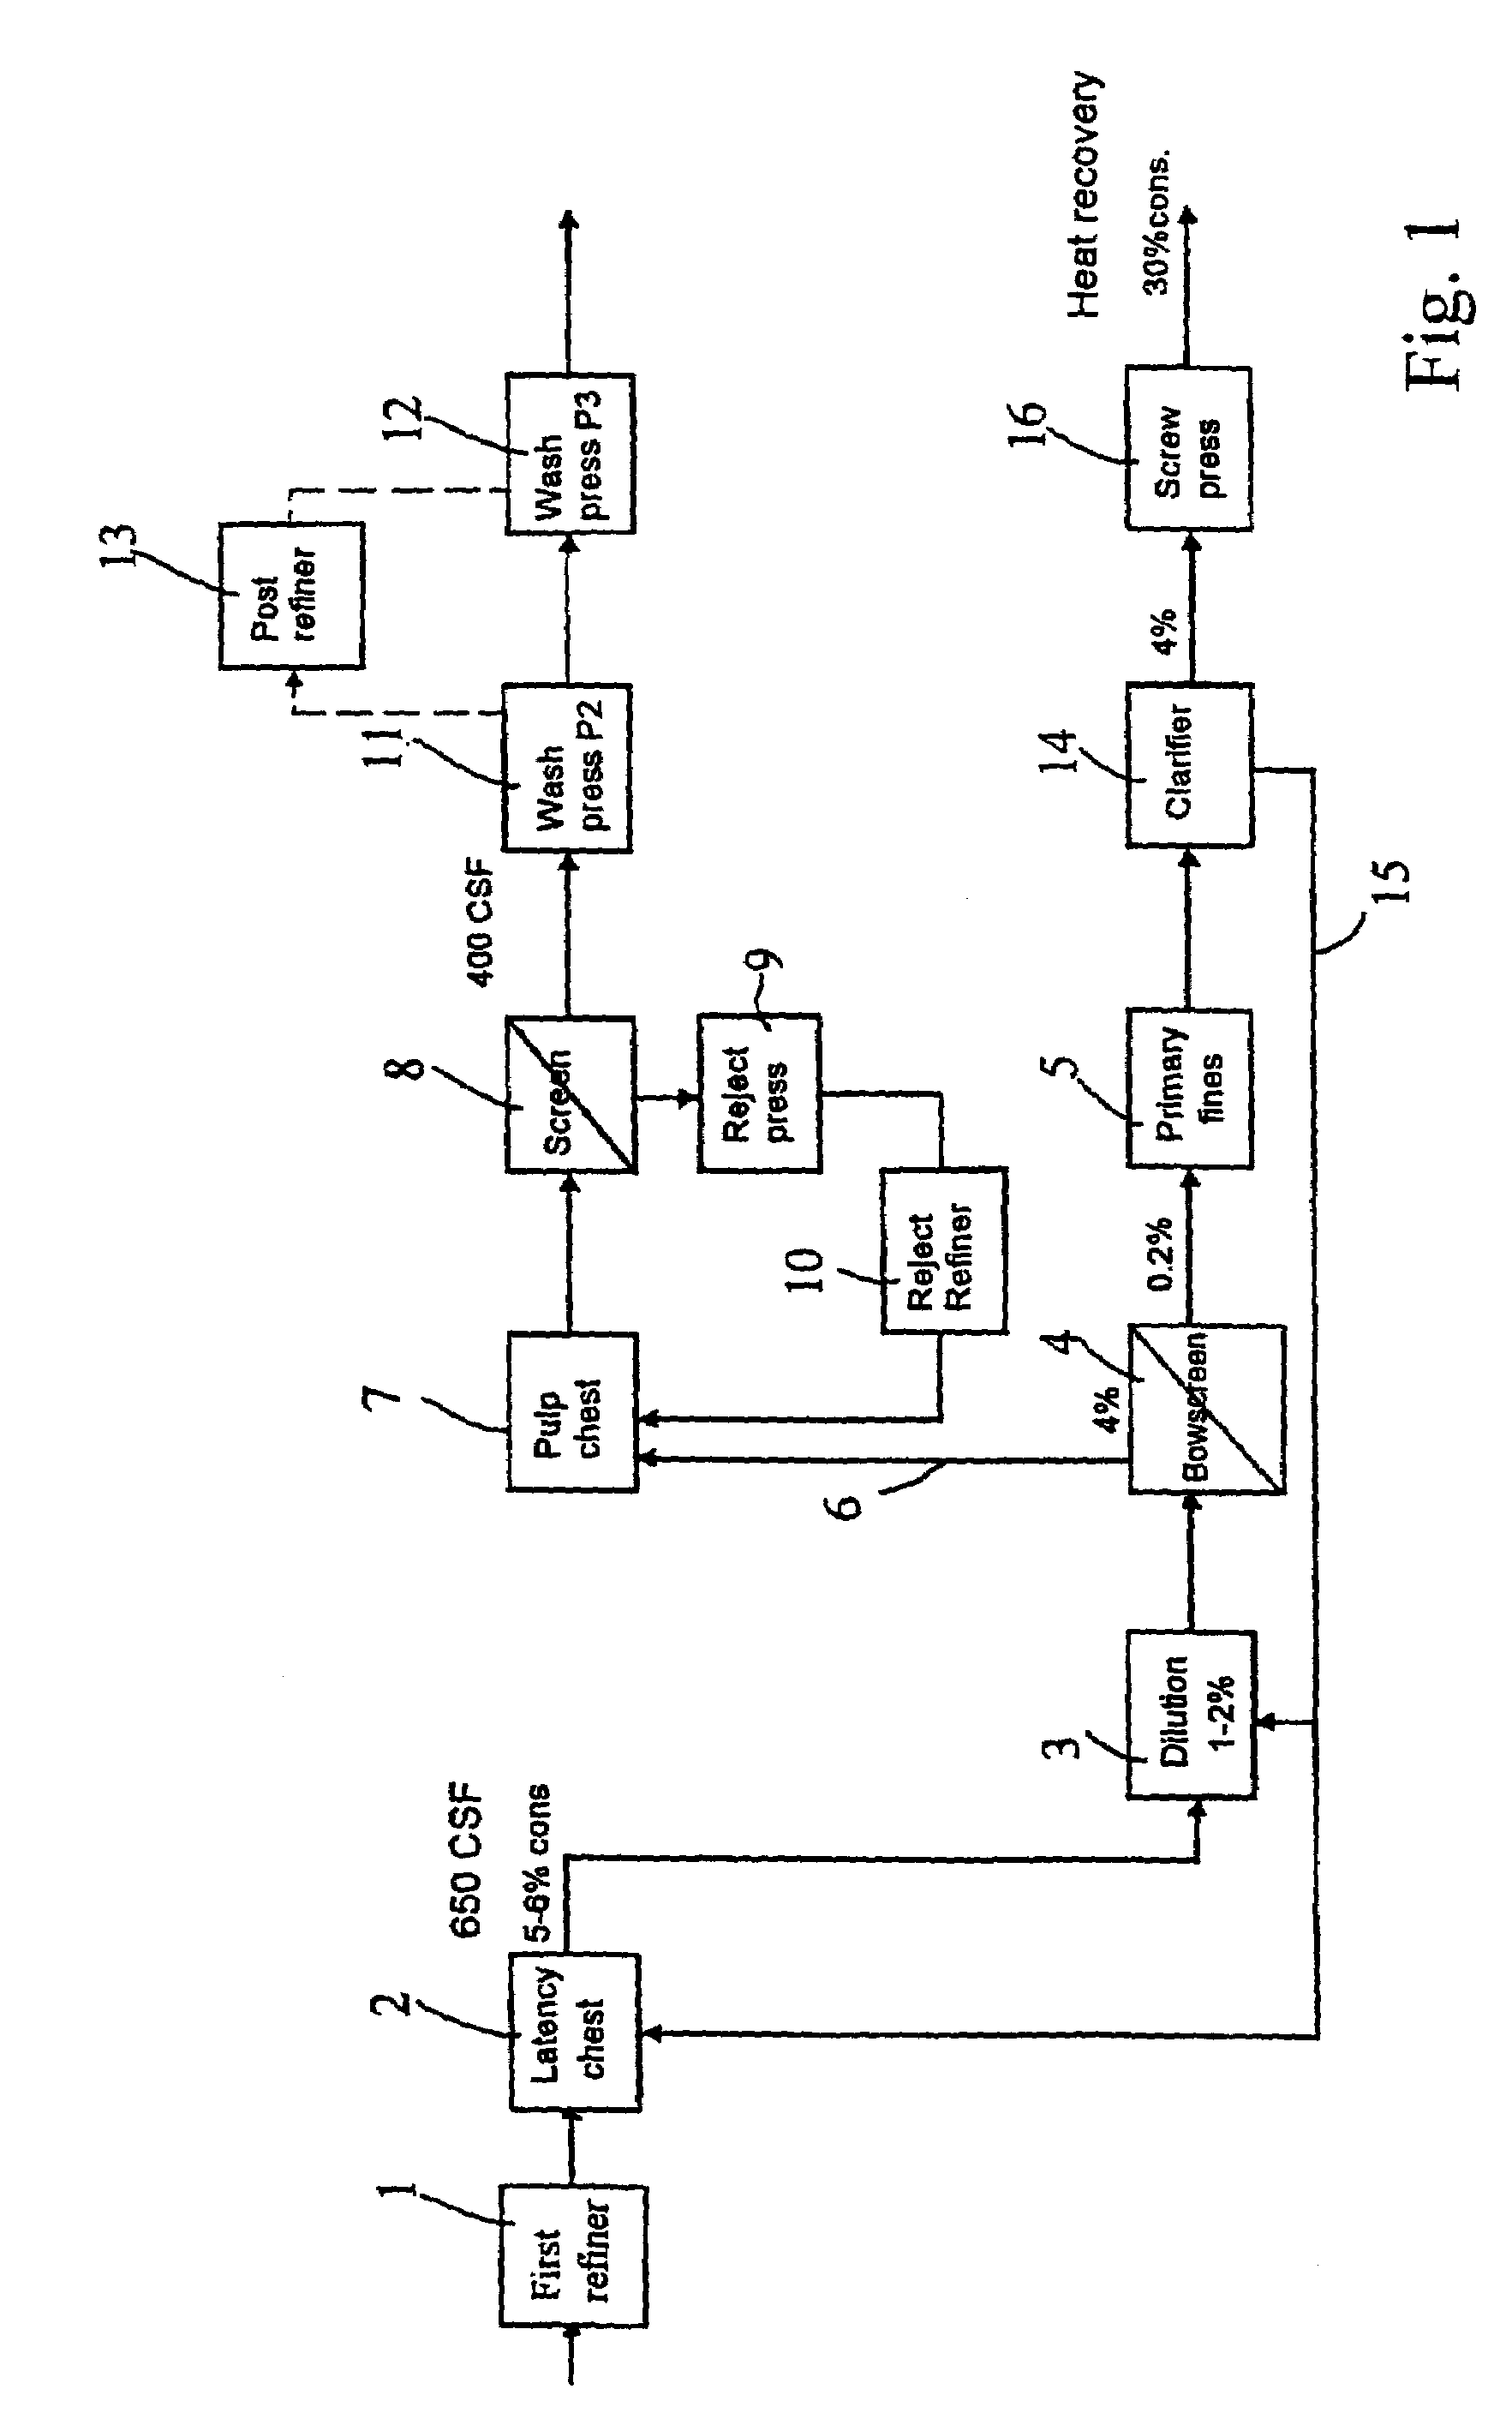 Method in connection with the production of mechanical pulp